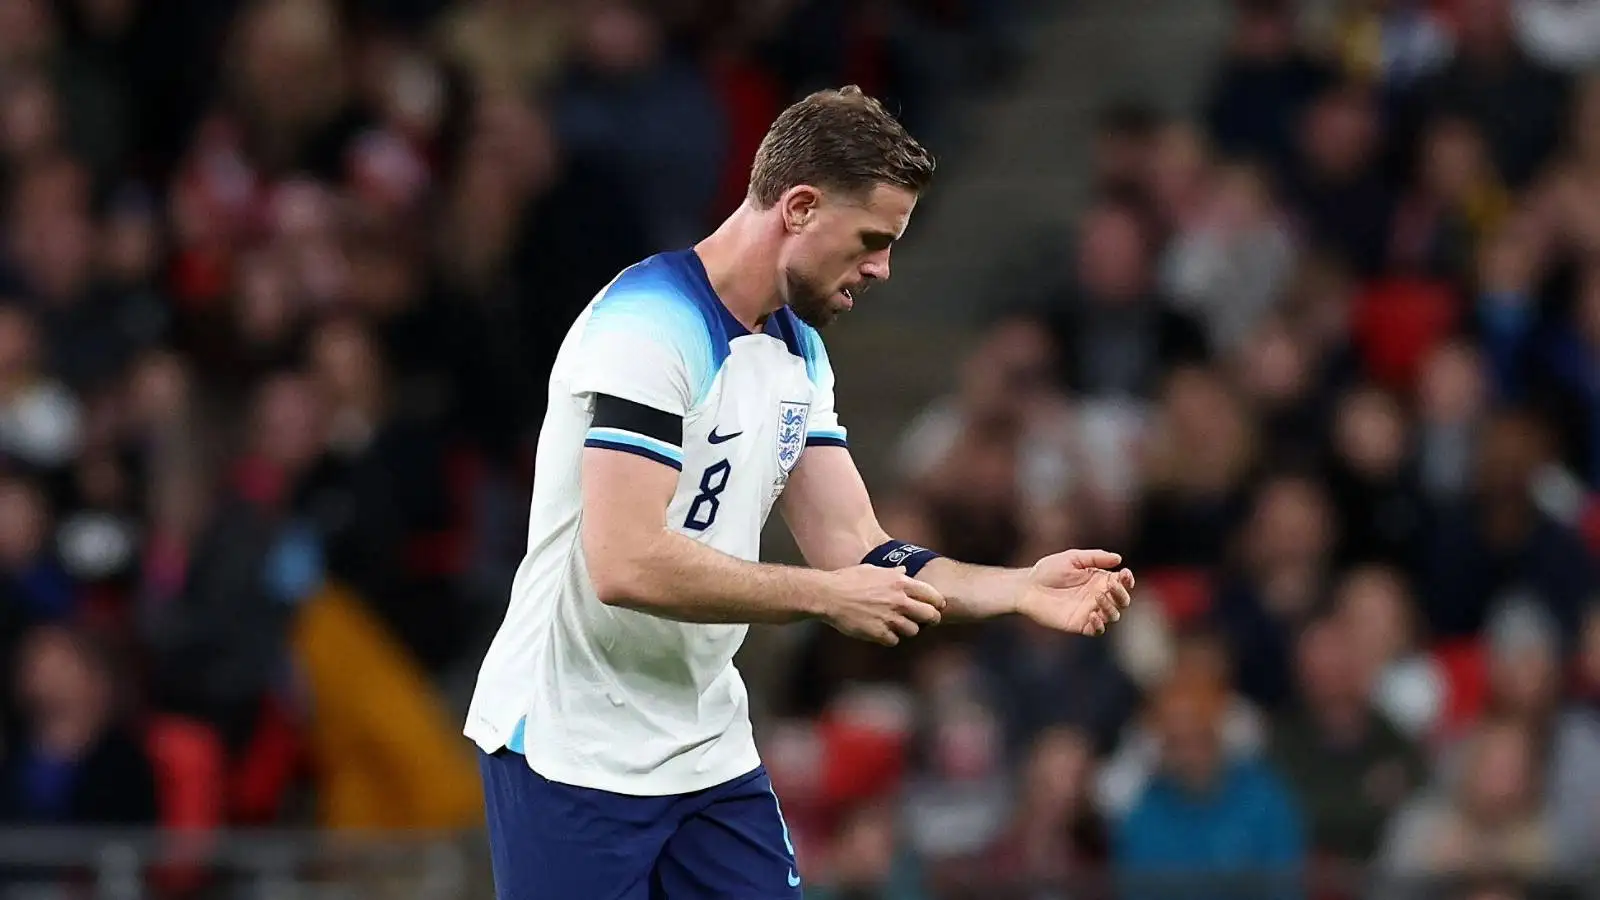 Jordan Henderson is substituted for England in game against Australia